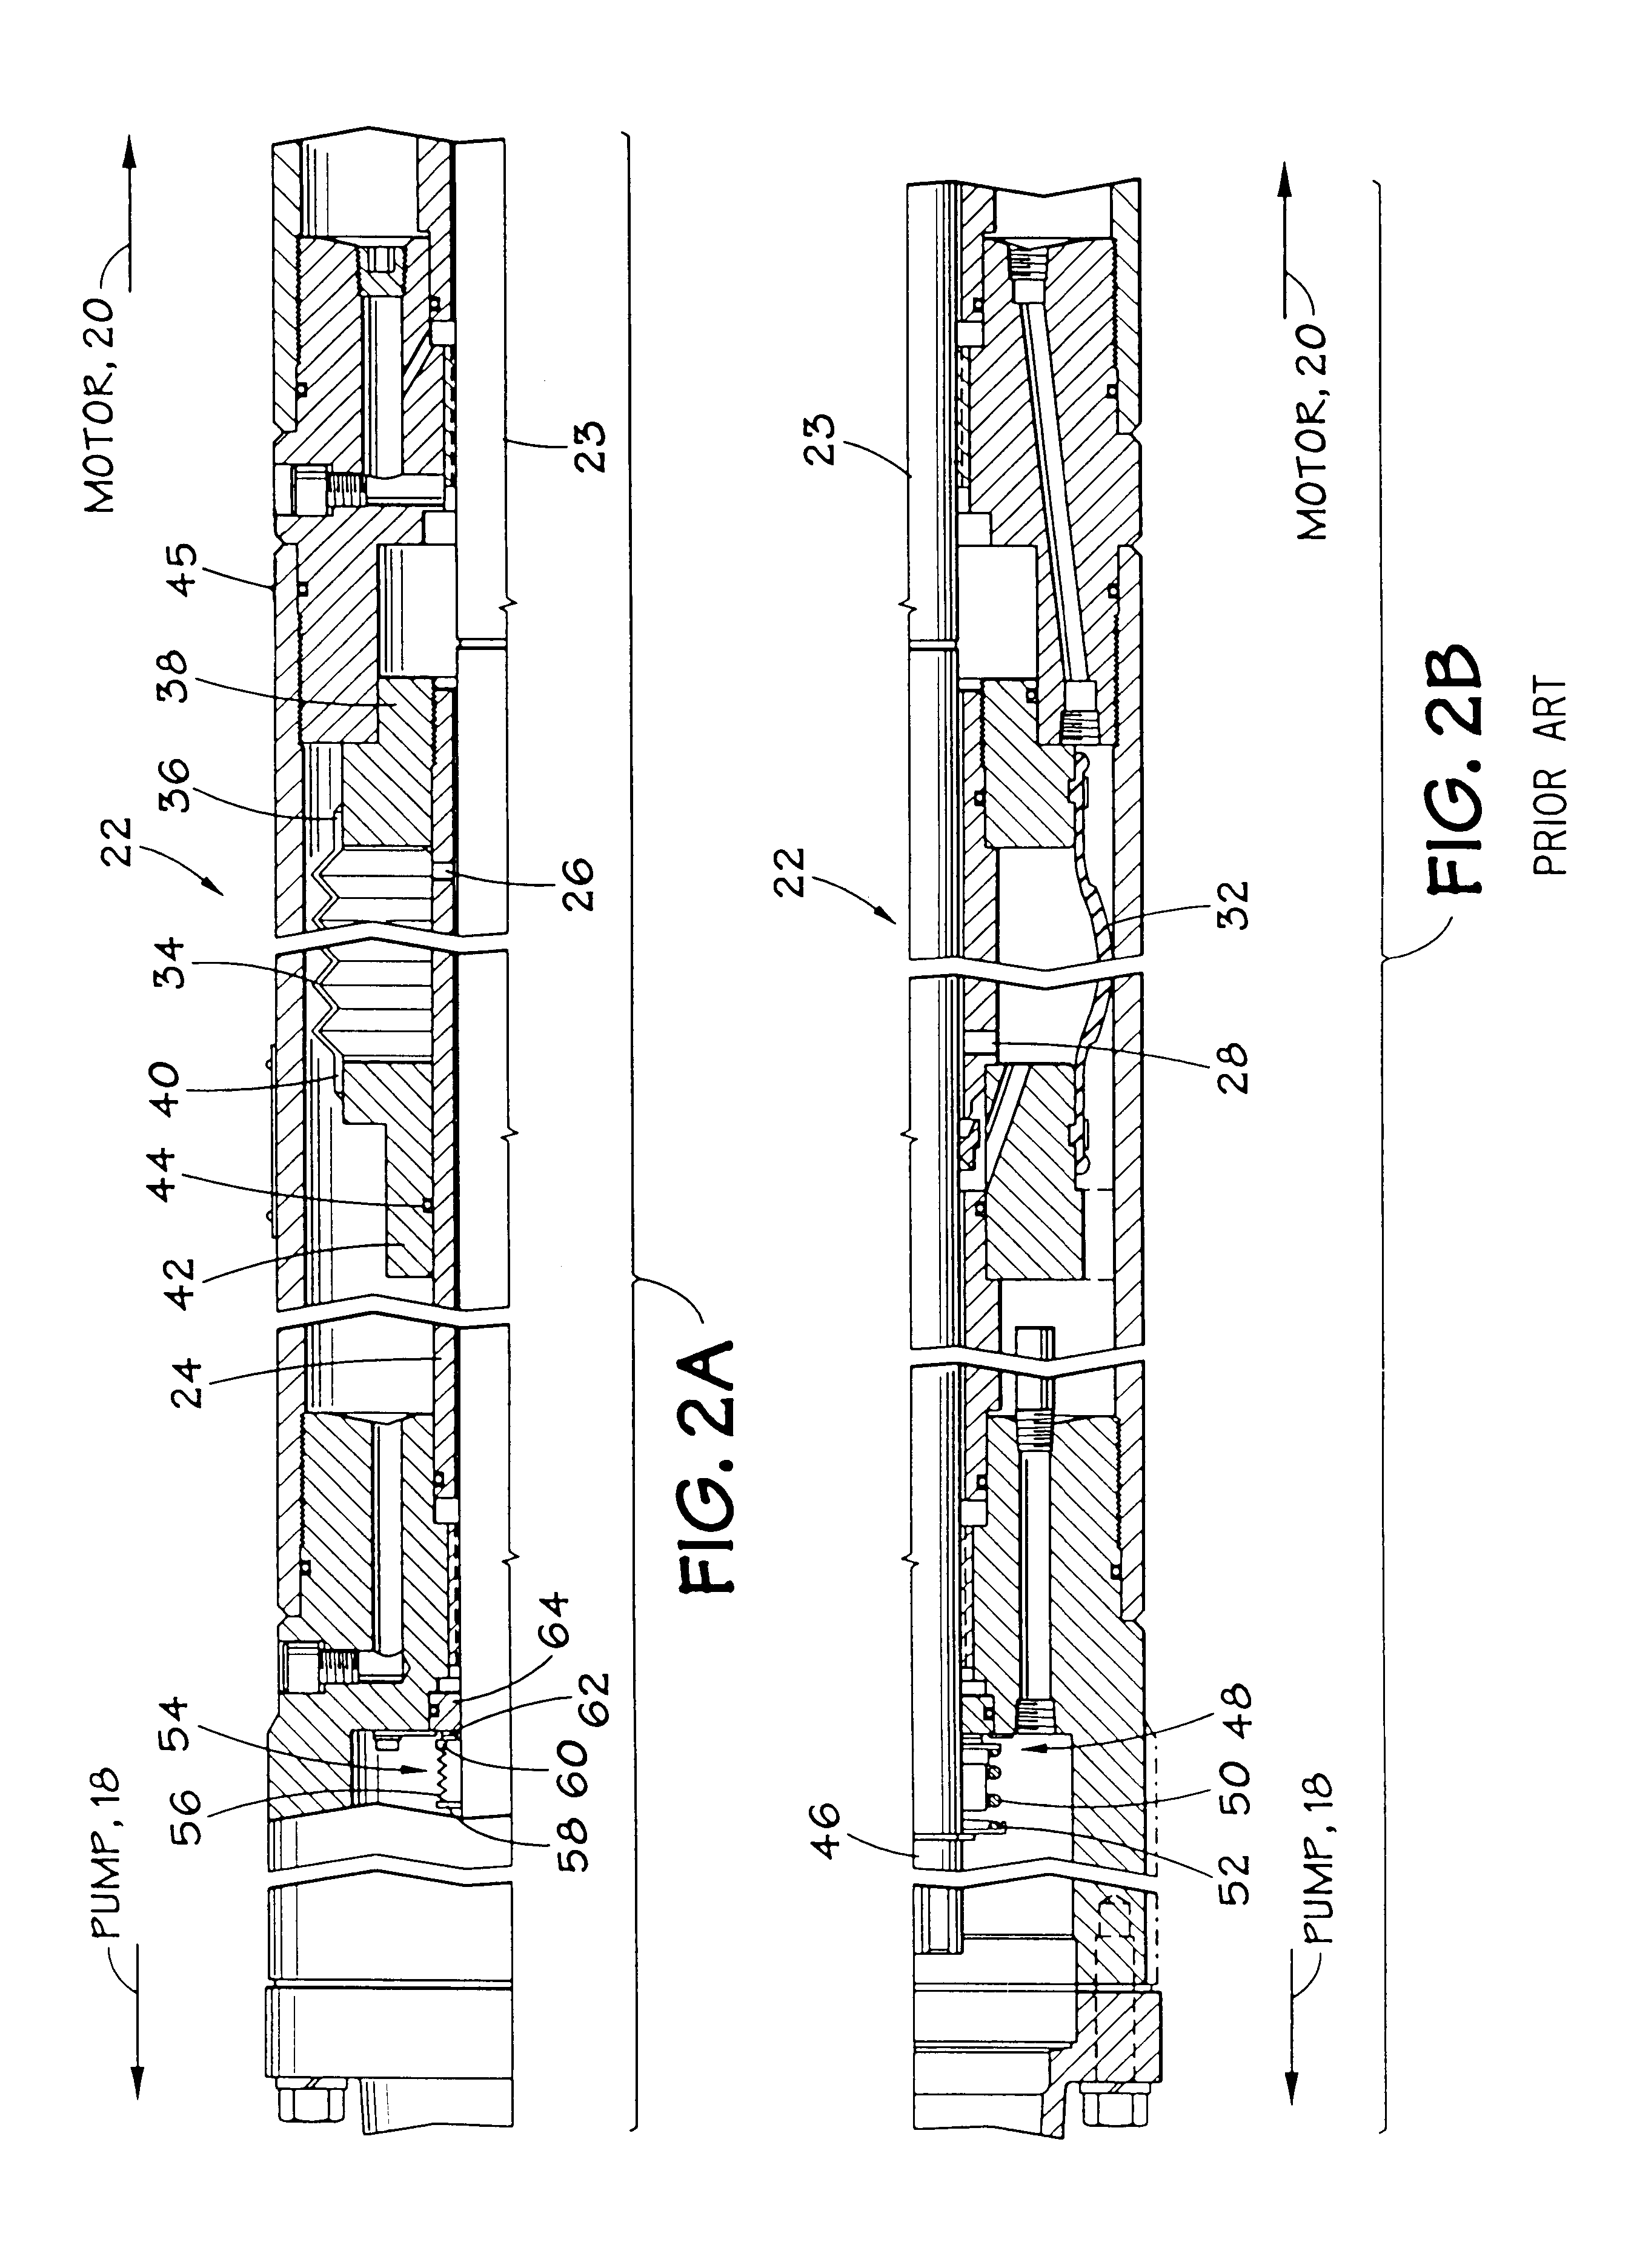 Submersible pumping system utilizing a motor protector having a metal bellows